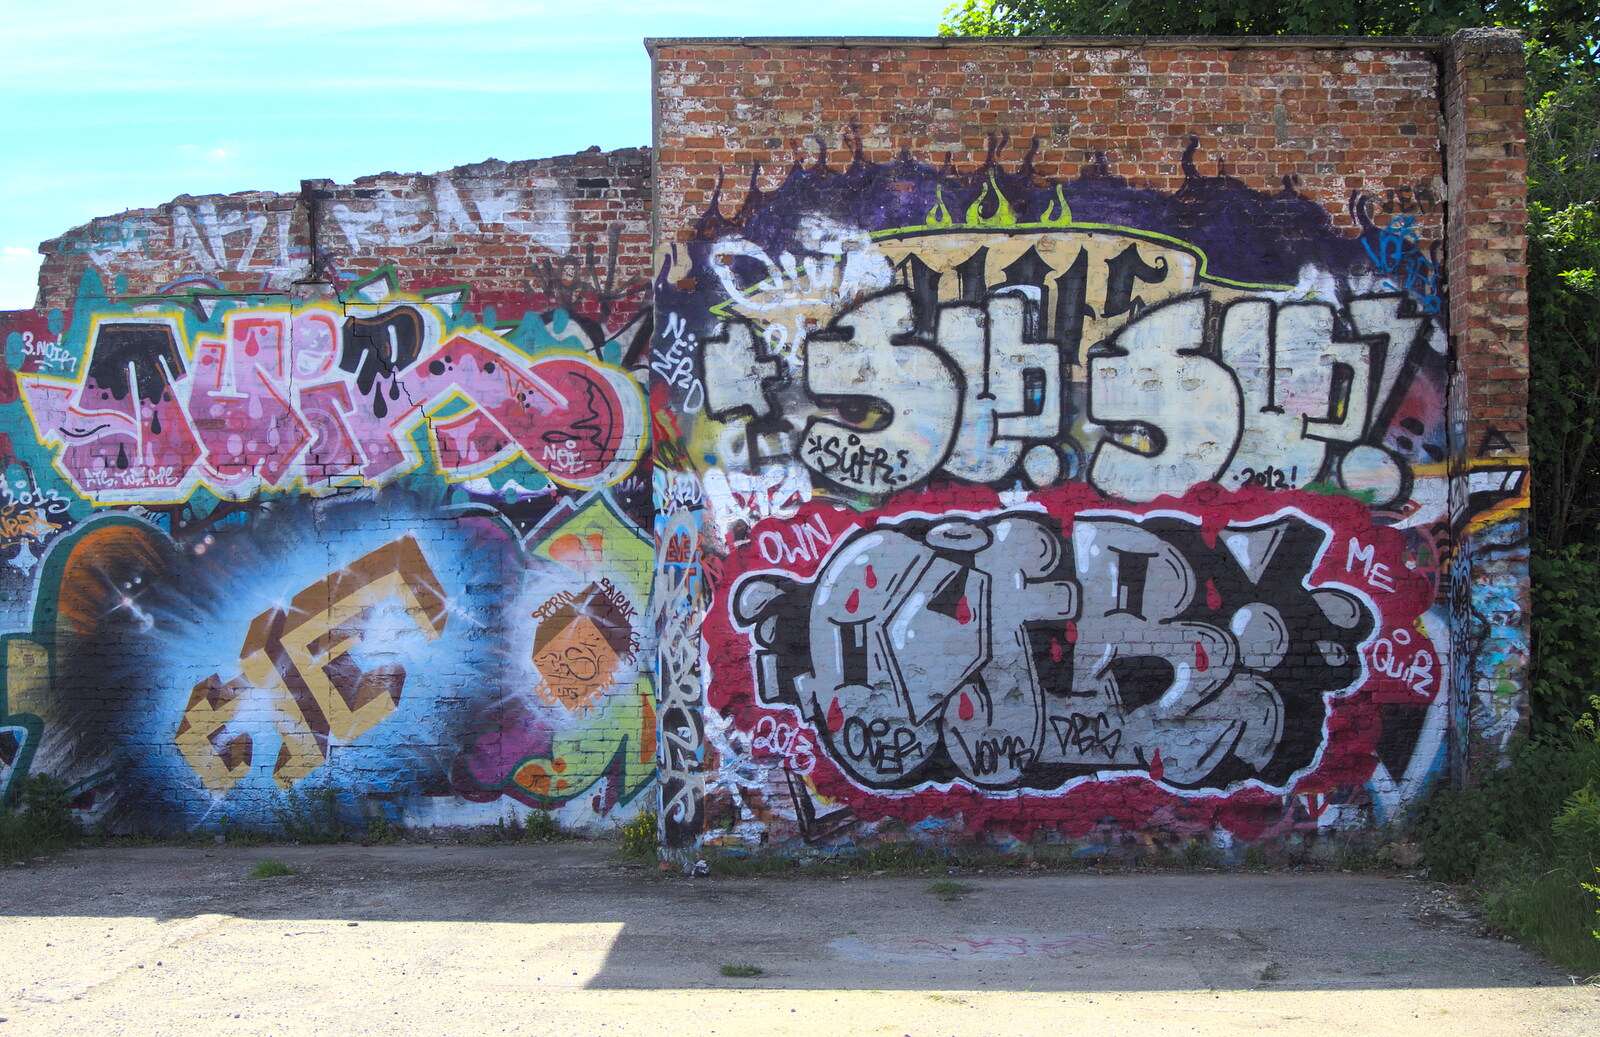 Derelict walls covered in graffiti from The Dereliction of HMSO, Botolph Street, Norwich - 26th May 2013